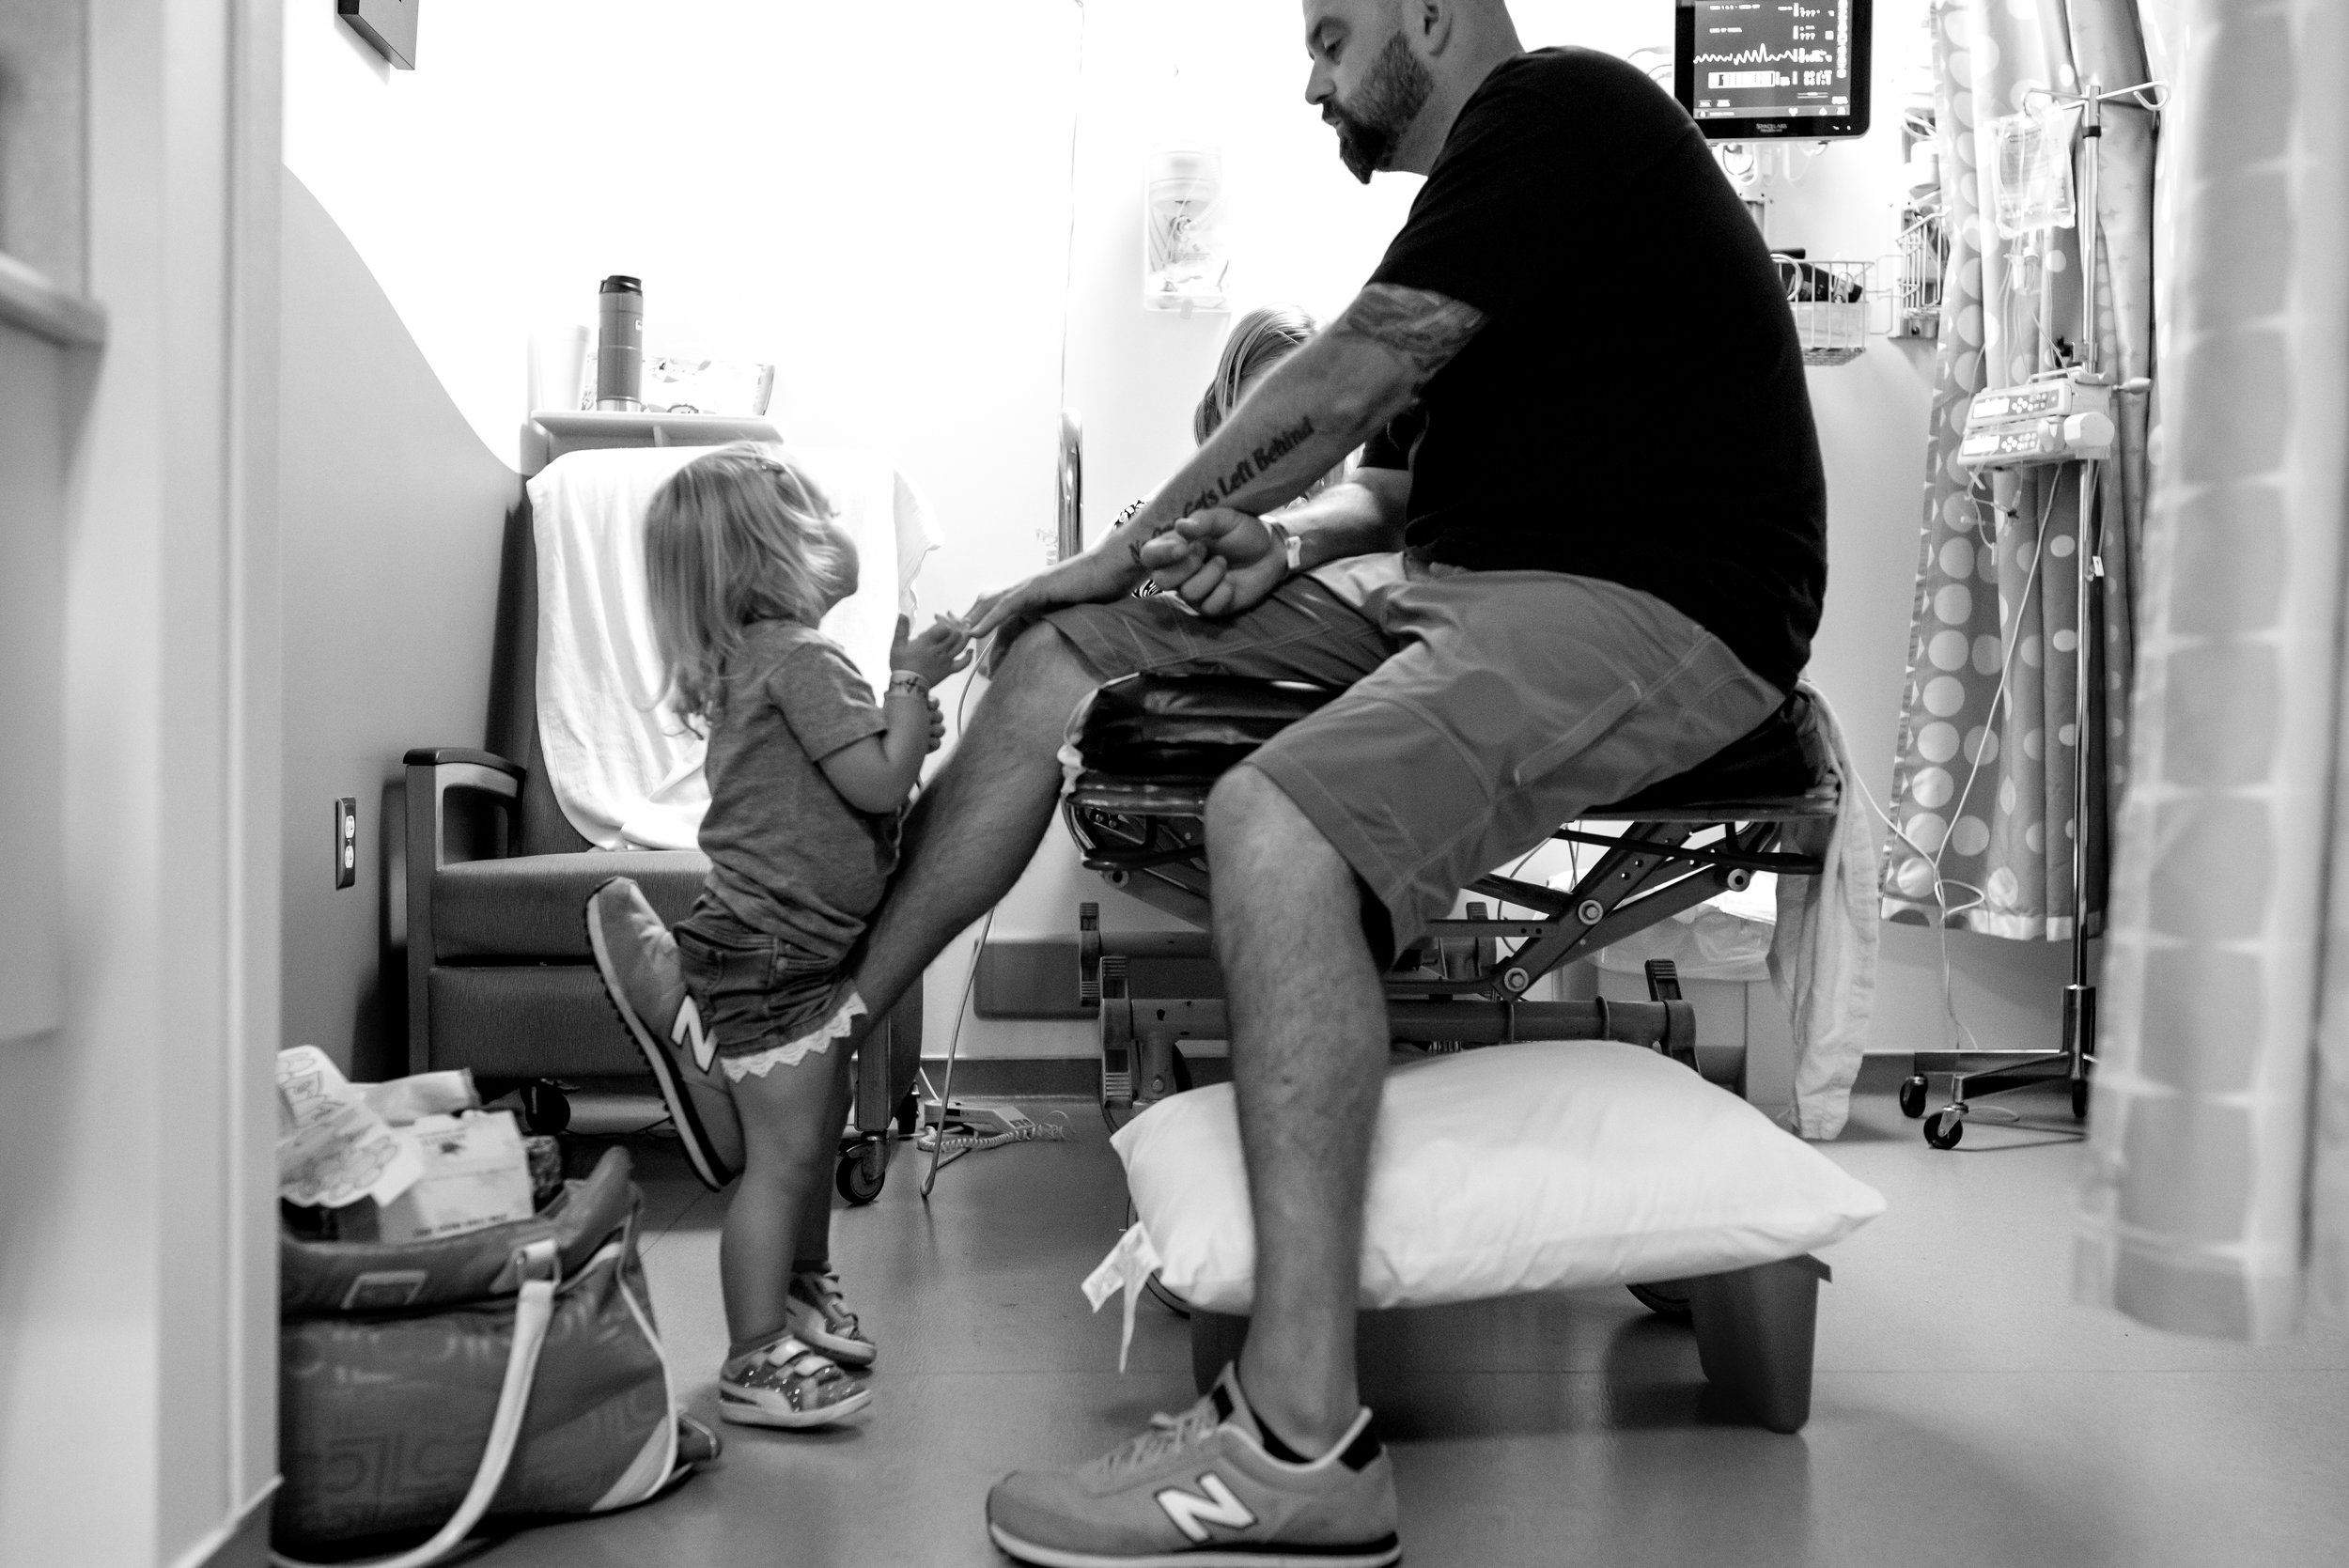 Dad plays with daughters in hospital